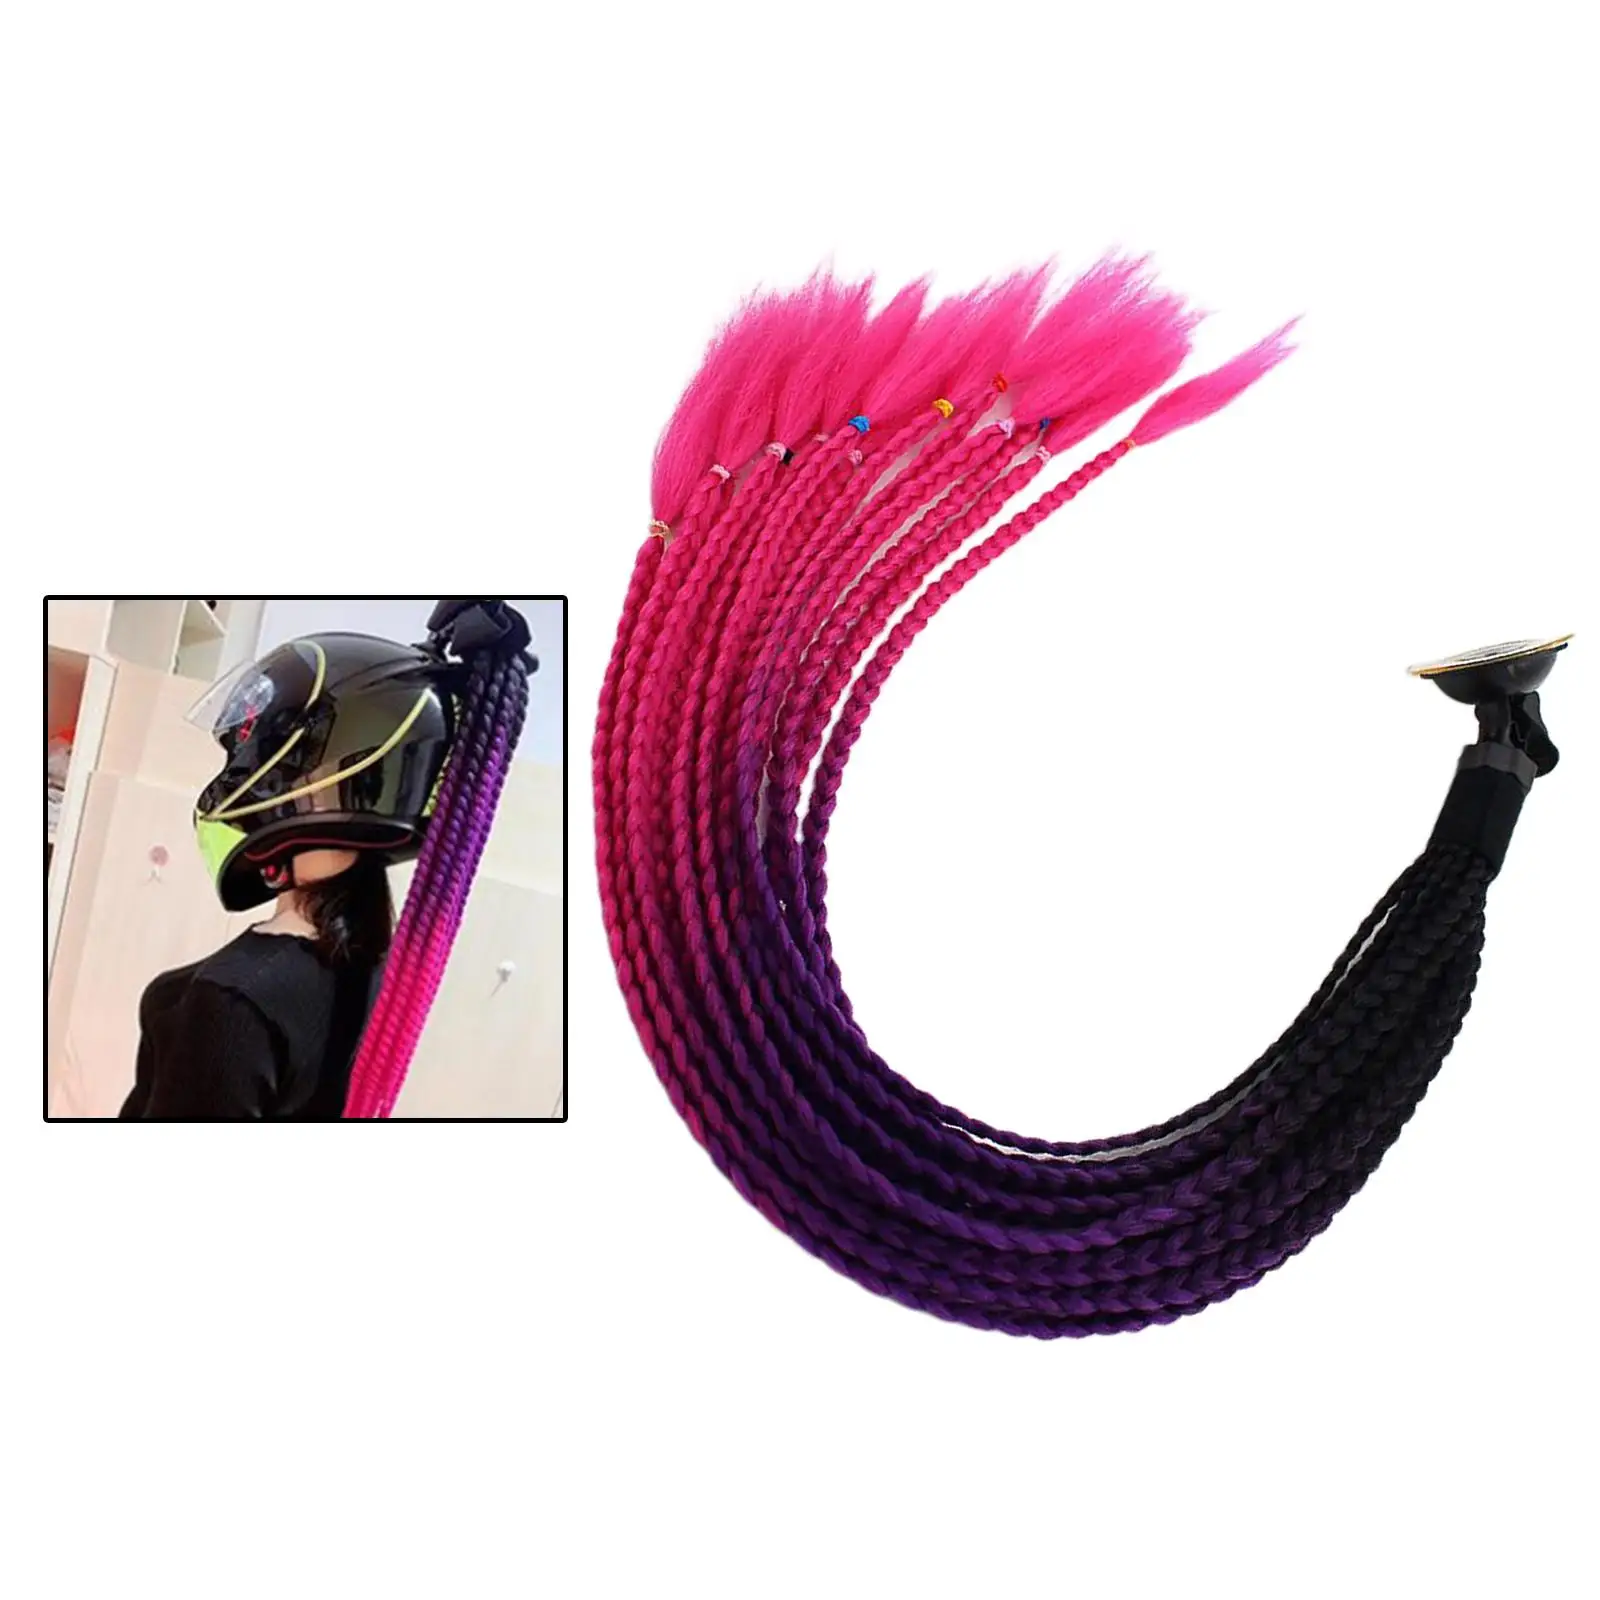 2x Unisex Adults Gradient Ramp Ponytail Curly Hair for Motorcycle Motor Black Rose Red